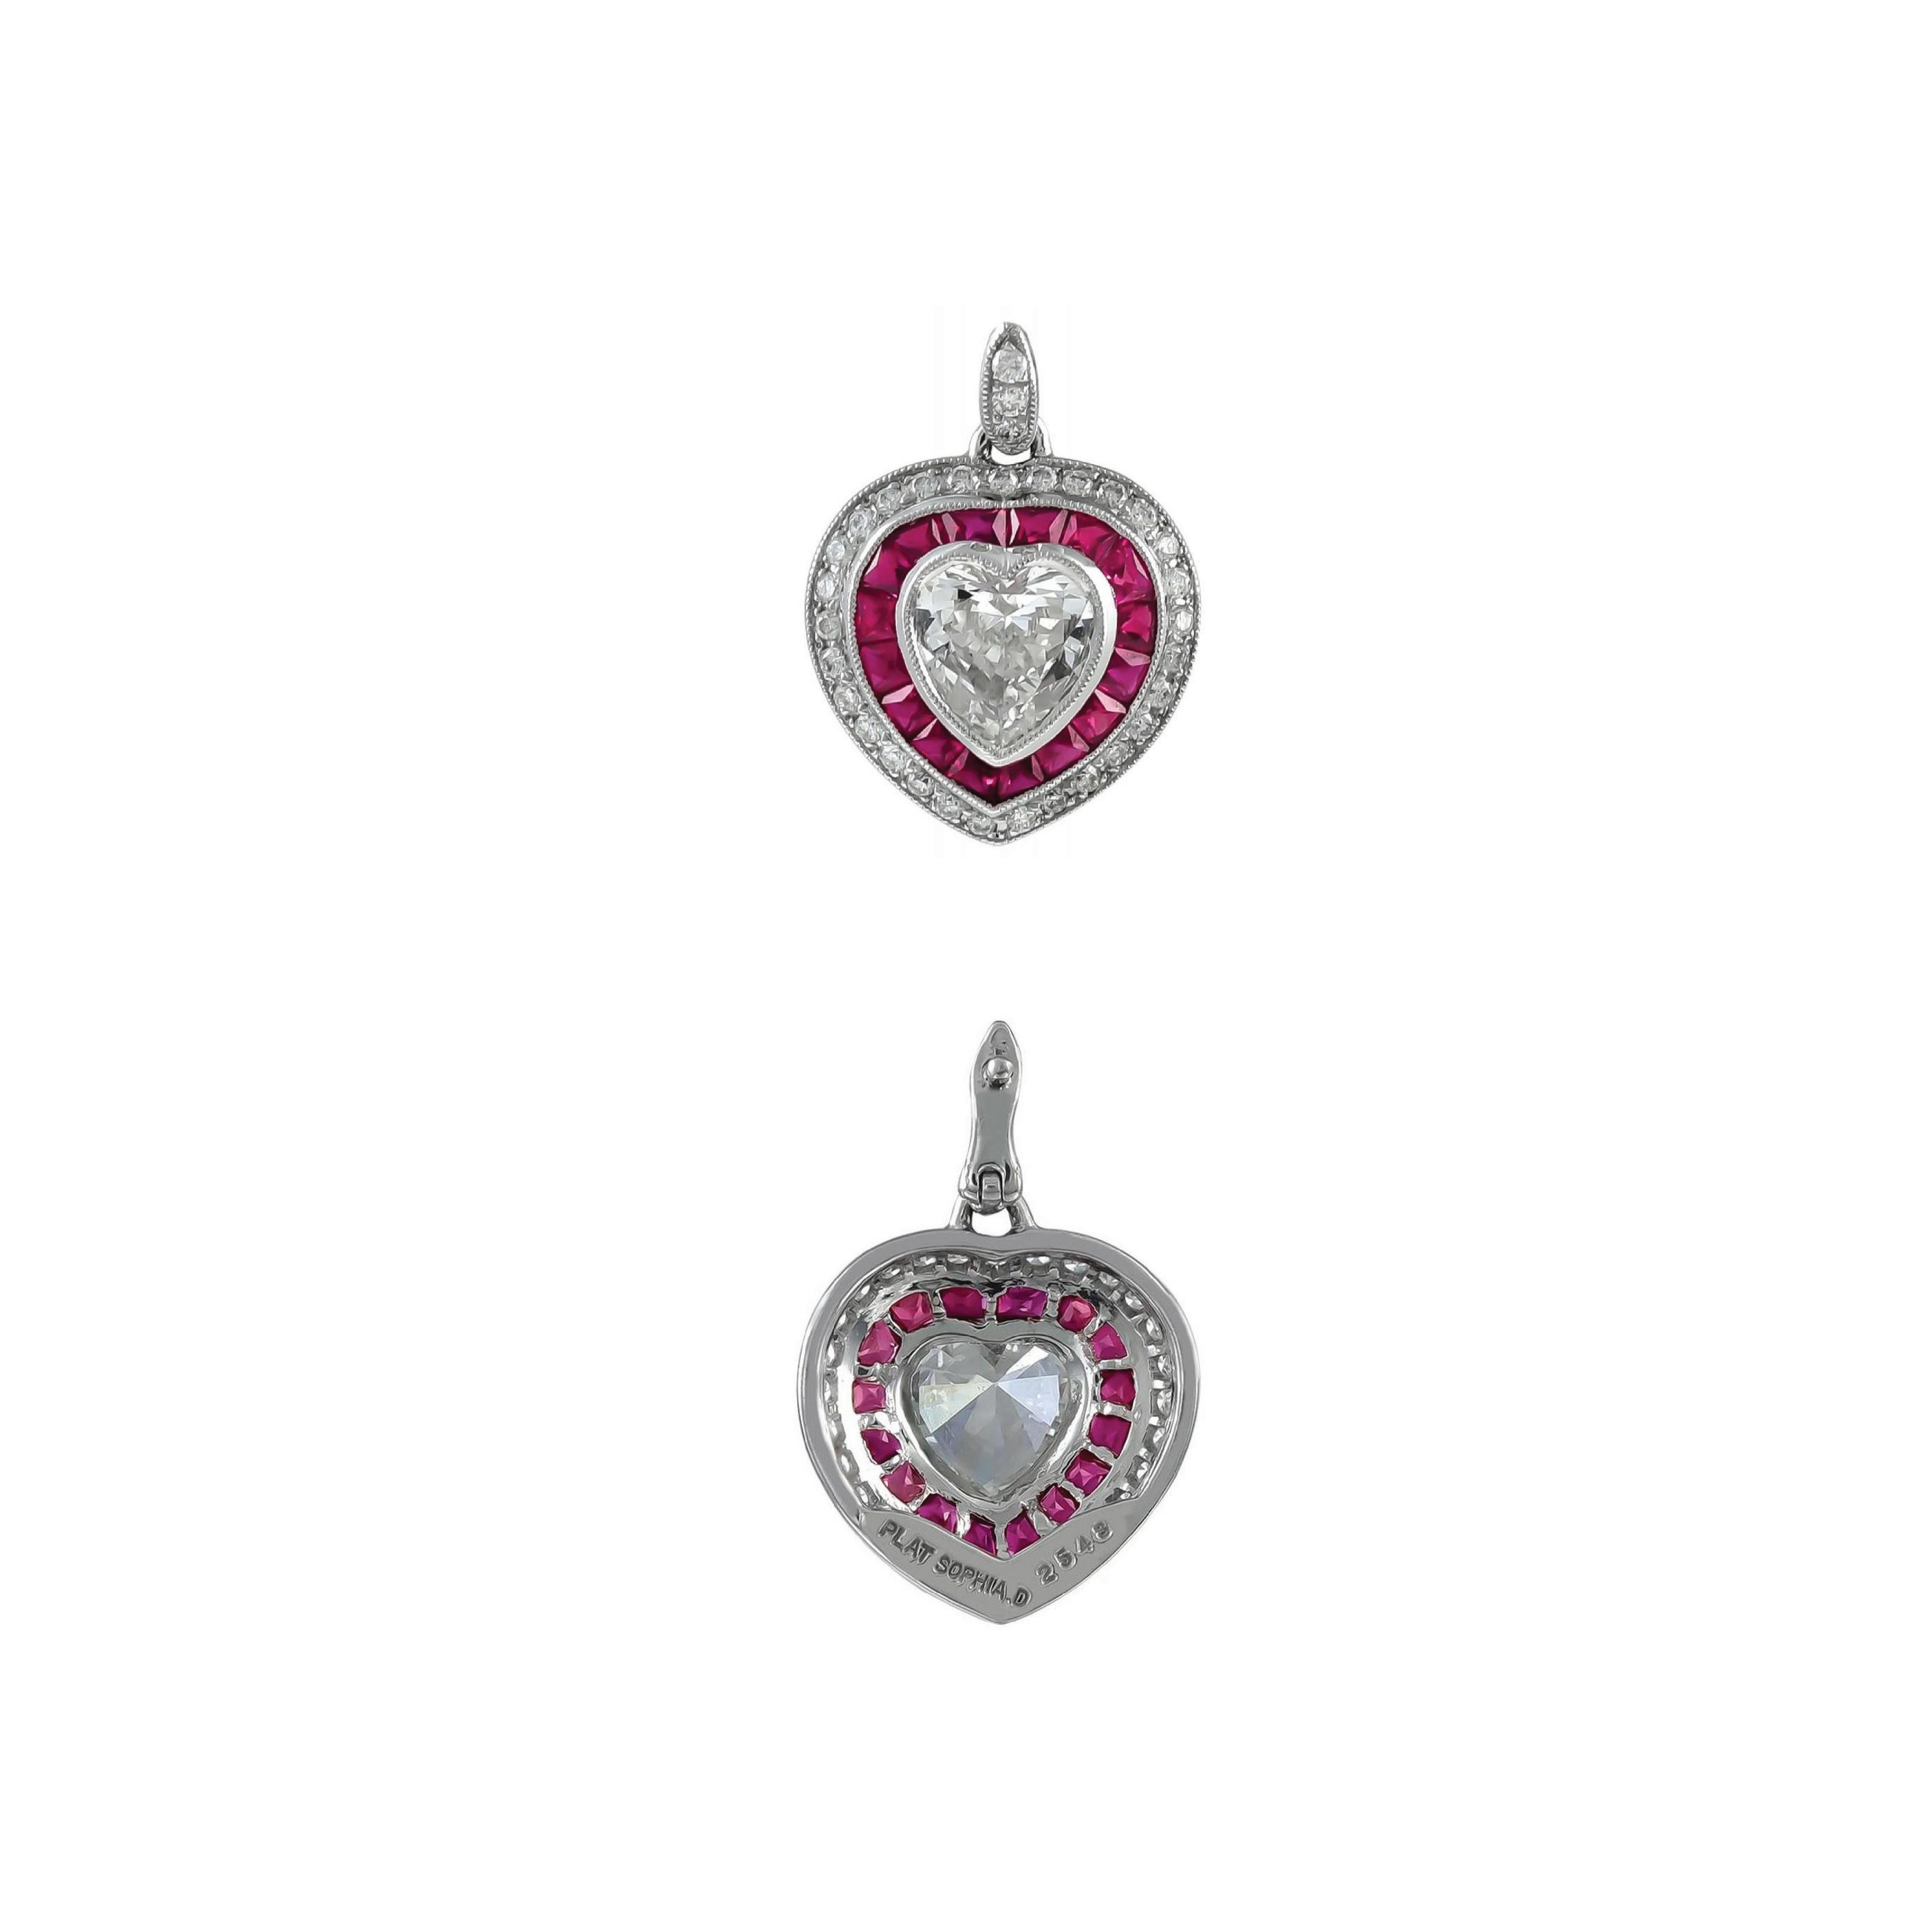 Heart Cut Sophia D. Heart Shaped Platinum Pendant with Rubies and Diamonds For Sale